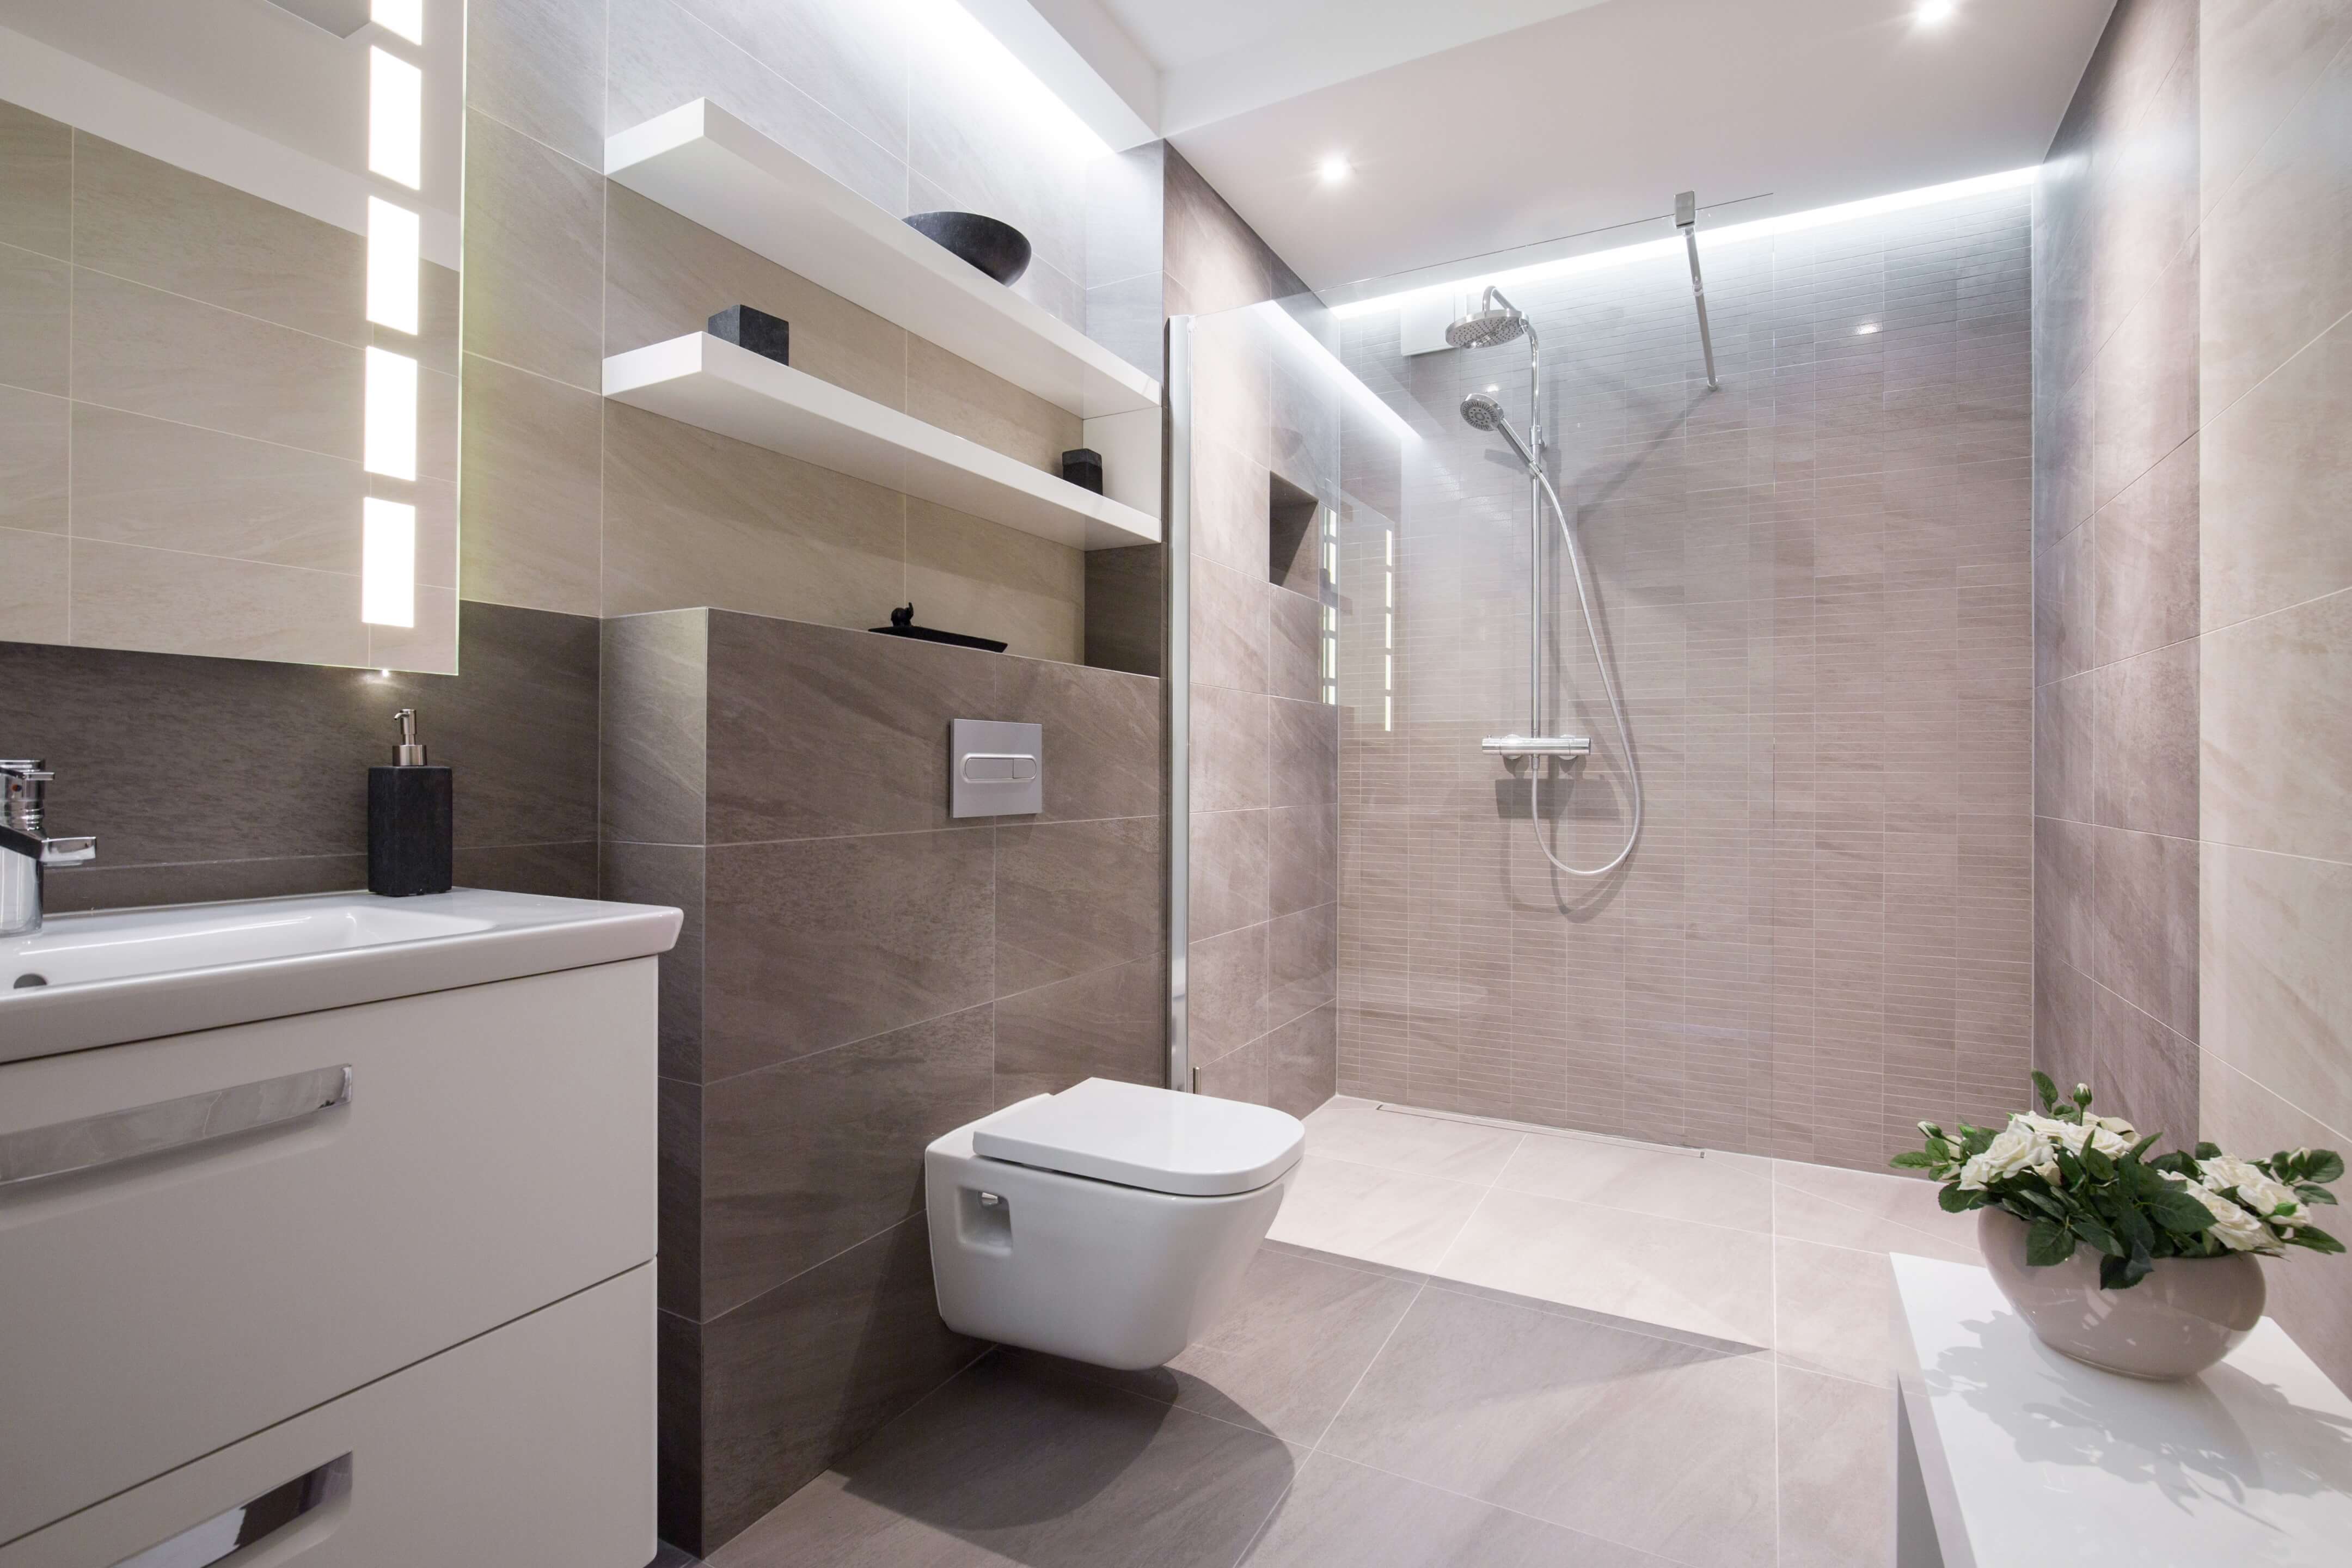 local bathroom fitters east dulwich